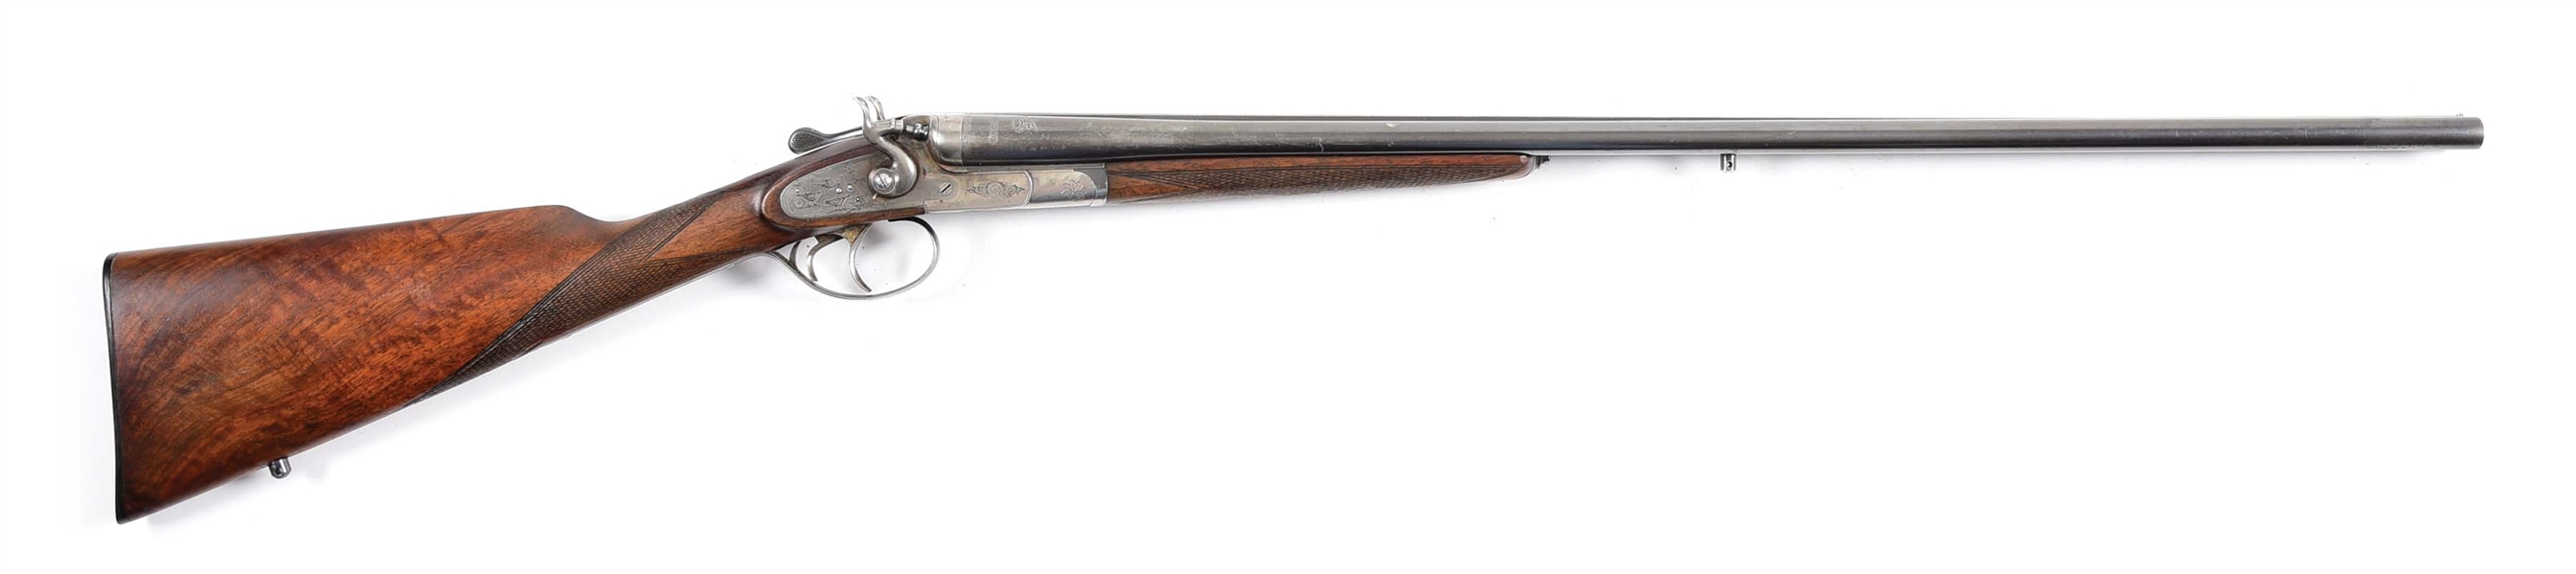 (C) PIEPER 28 BORE SIDE BY SIDE SHOTGUN WITH CASE.